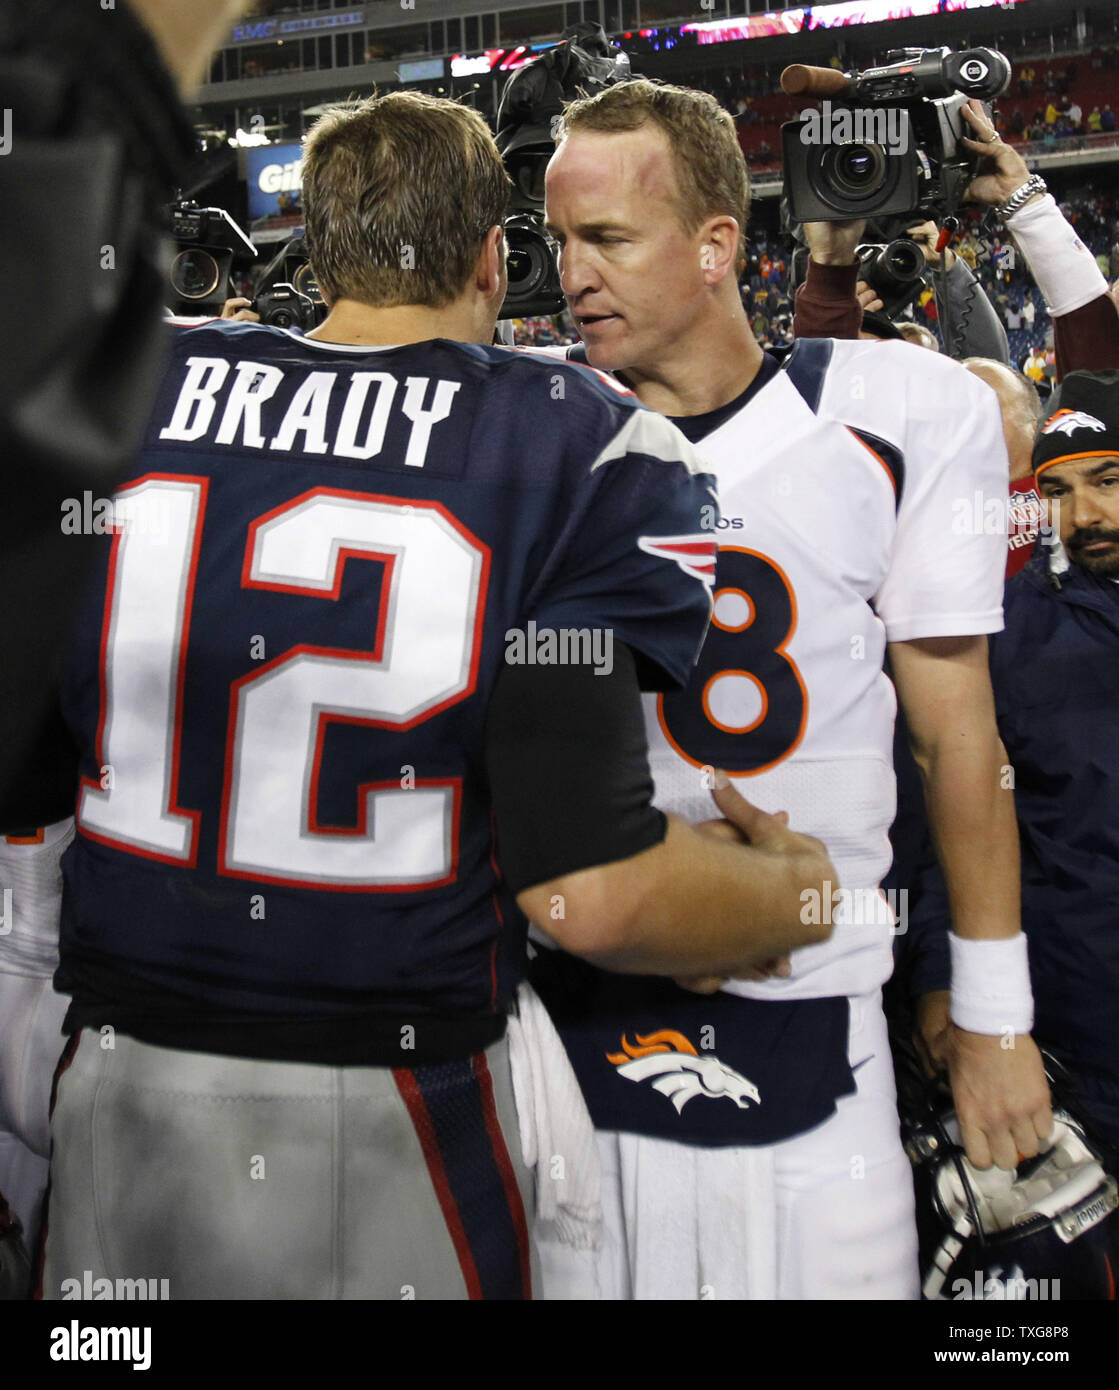 New England Patriots quarterback Tom Brady (12) shakes hands with Denver Broncos quarterback Peyton Manning at the end of the game at Gillette Stadium in Foxboro, Massachusetts on October 7, 2012.  The Patriots defeated the Broncos 31-21.   UPI/Matthew Healey Stock Photo